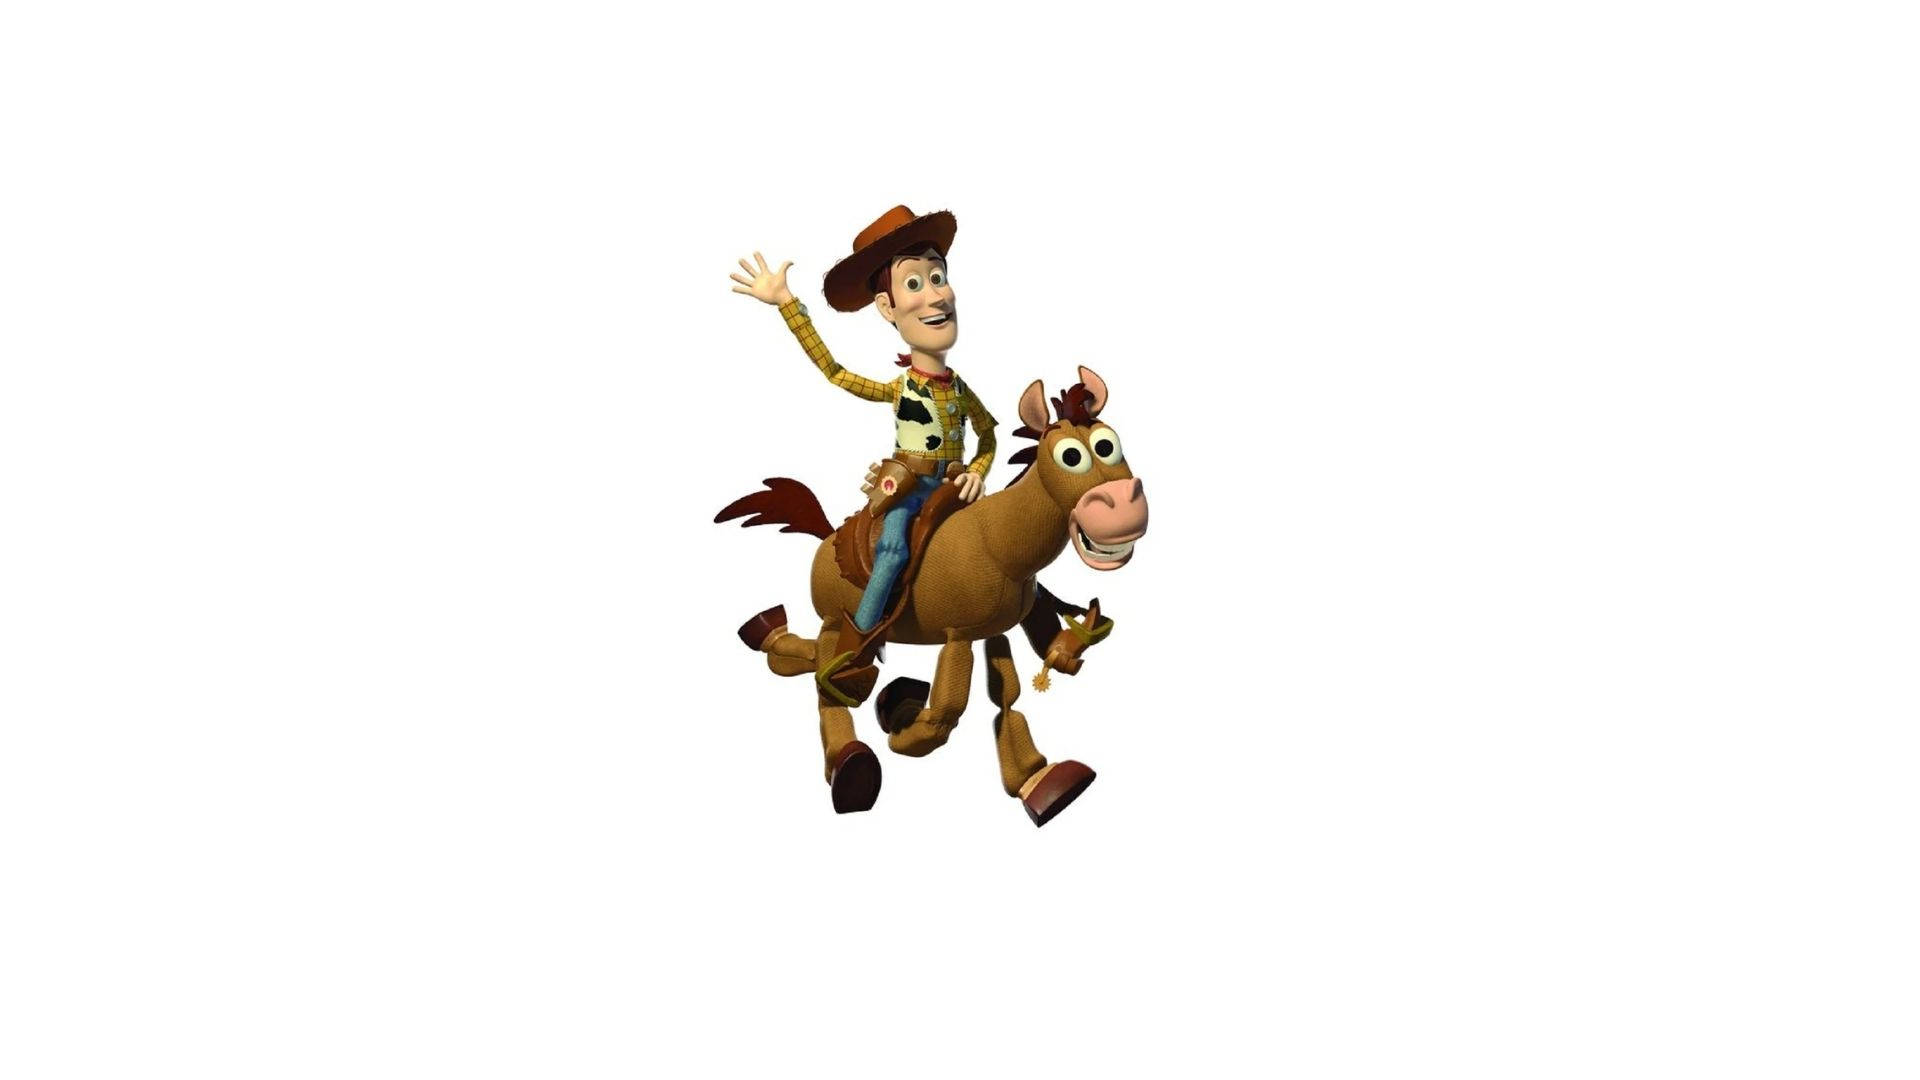 (in The Context Of Computer Or Mobile Wallpaper, This Could Be A Description Of An Image Of Woody And Bullseye Riding Together, Which Could Make For A Great Wallpaper For Fans Of Toy Story.) Wallpaper